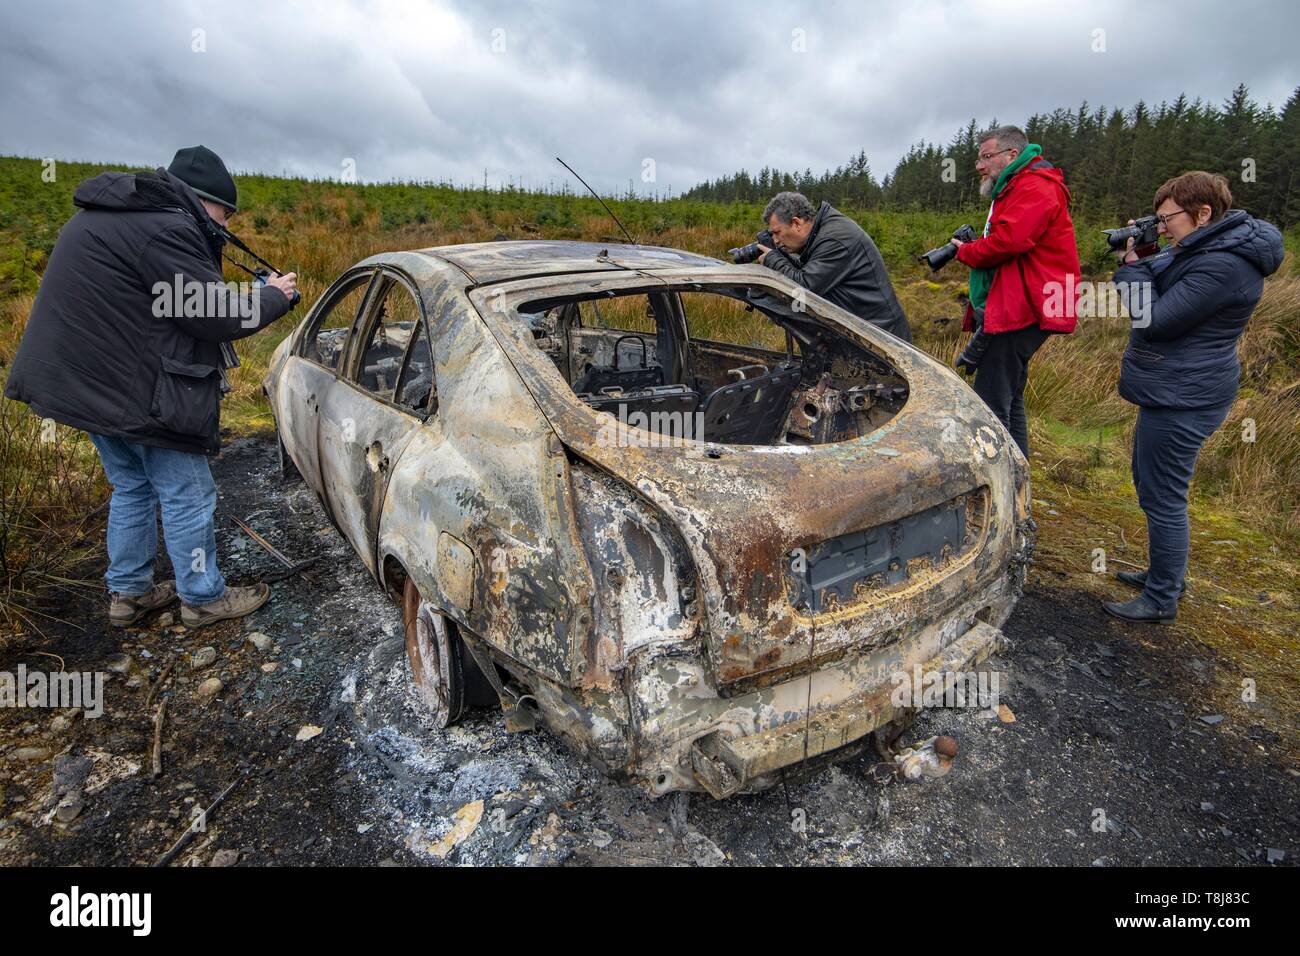 United Kingdom, Northern Ireland, Ulster, county Tyrone, Sperrin mountains, Burnt out car Stock Photo